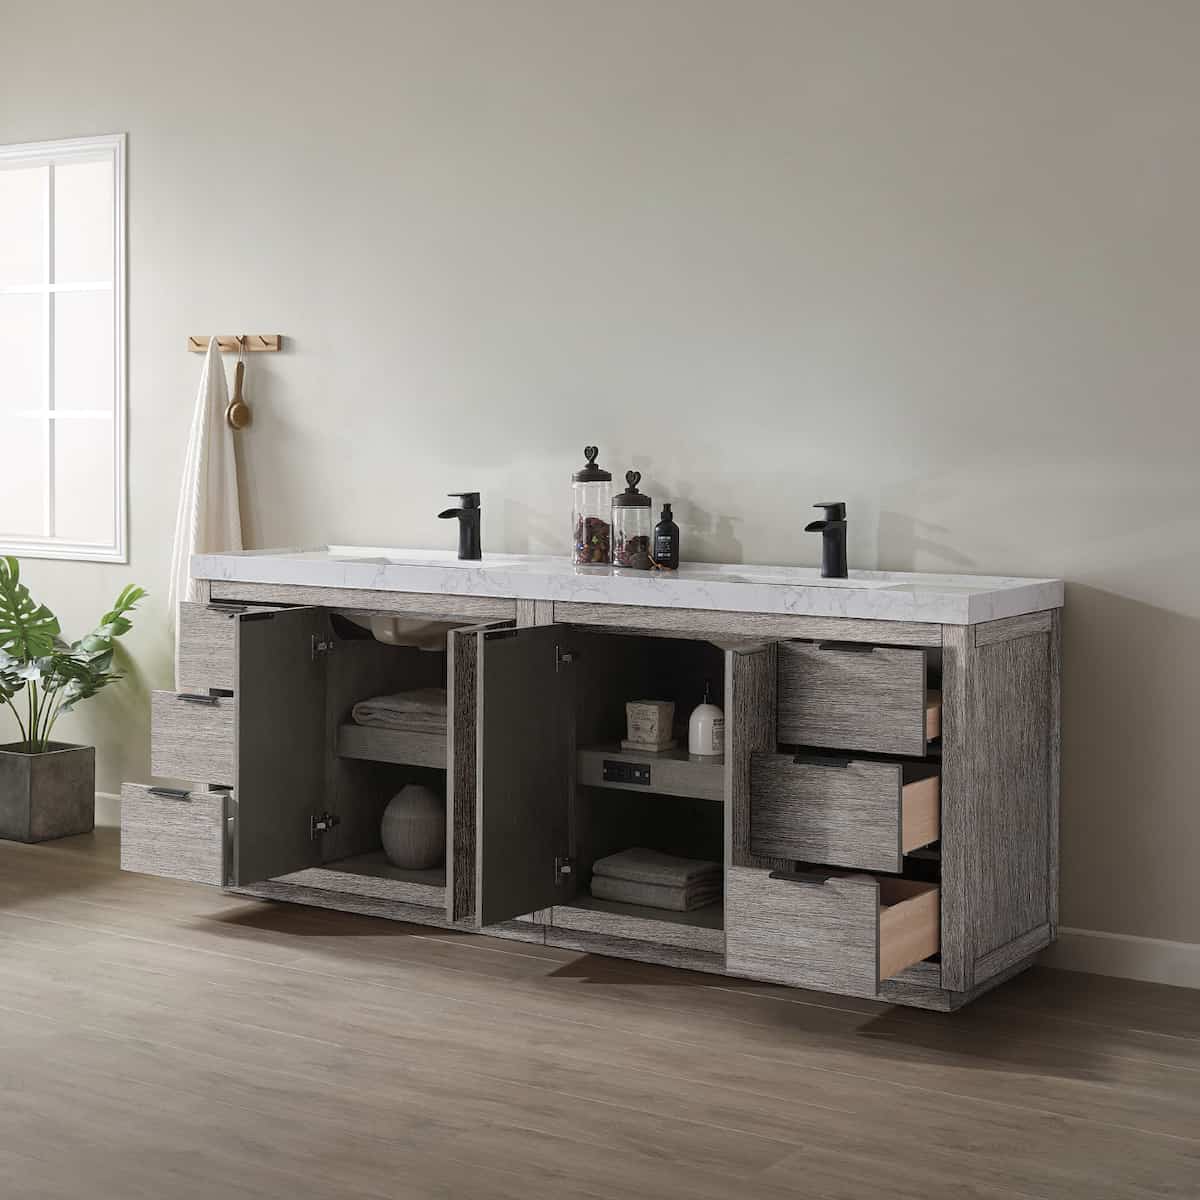 Vinnova Leiza 84 Inch Freestanding Double Vanity in Classical Grey with White Composite Grain Countertop Without Mirrors Inside 701584-CR-GW-NM